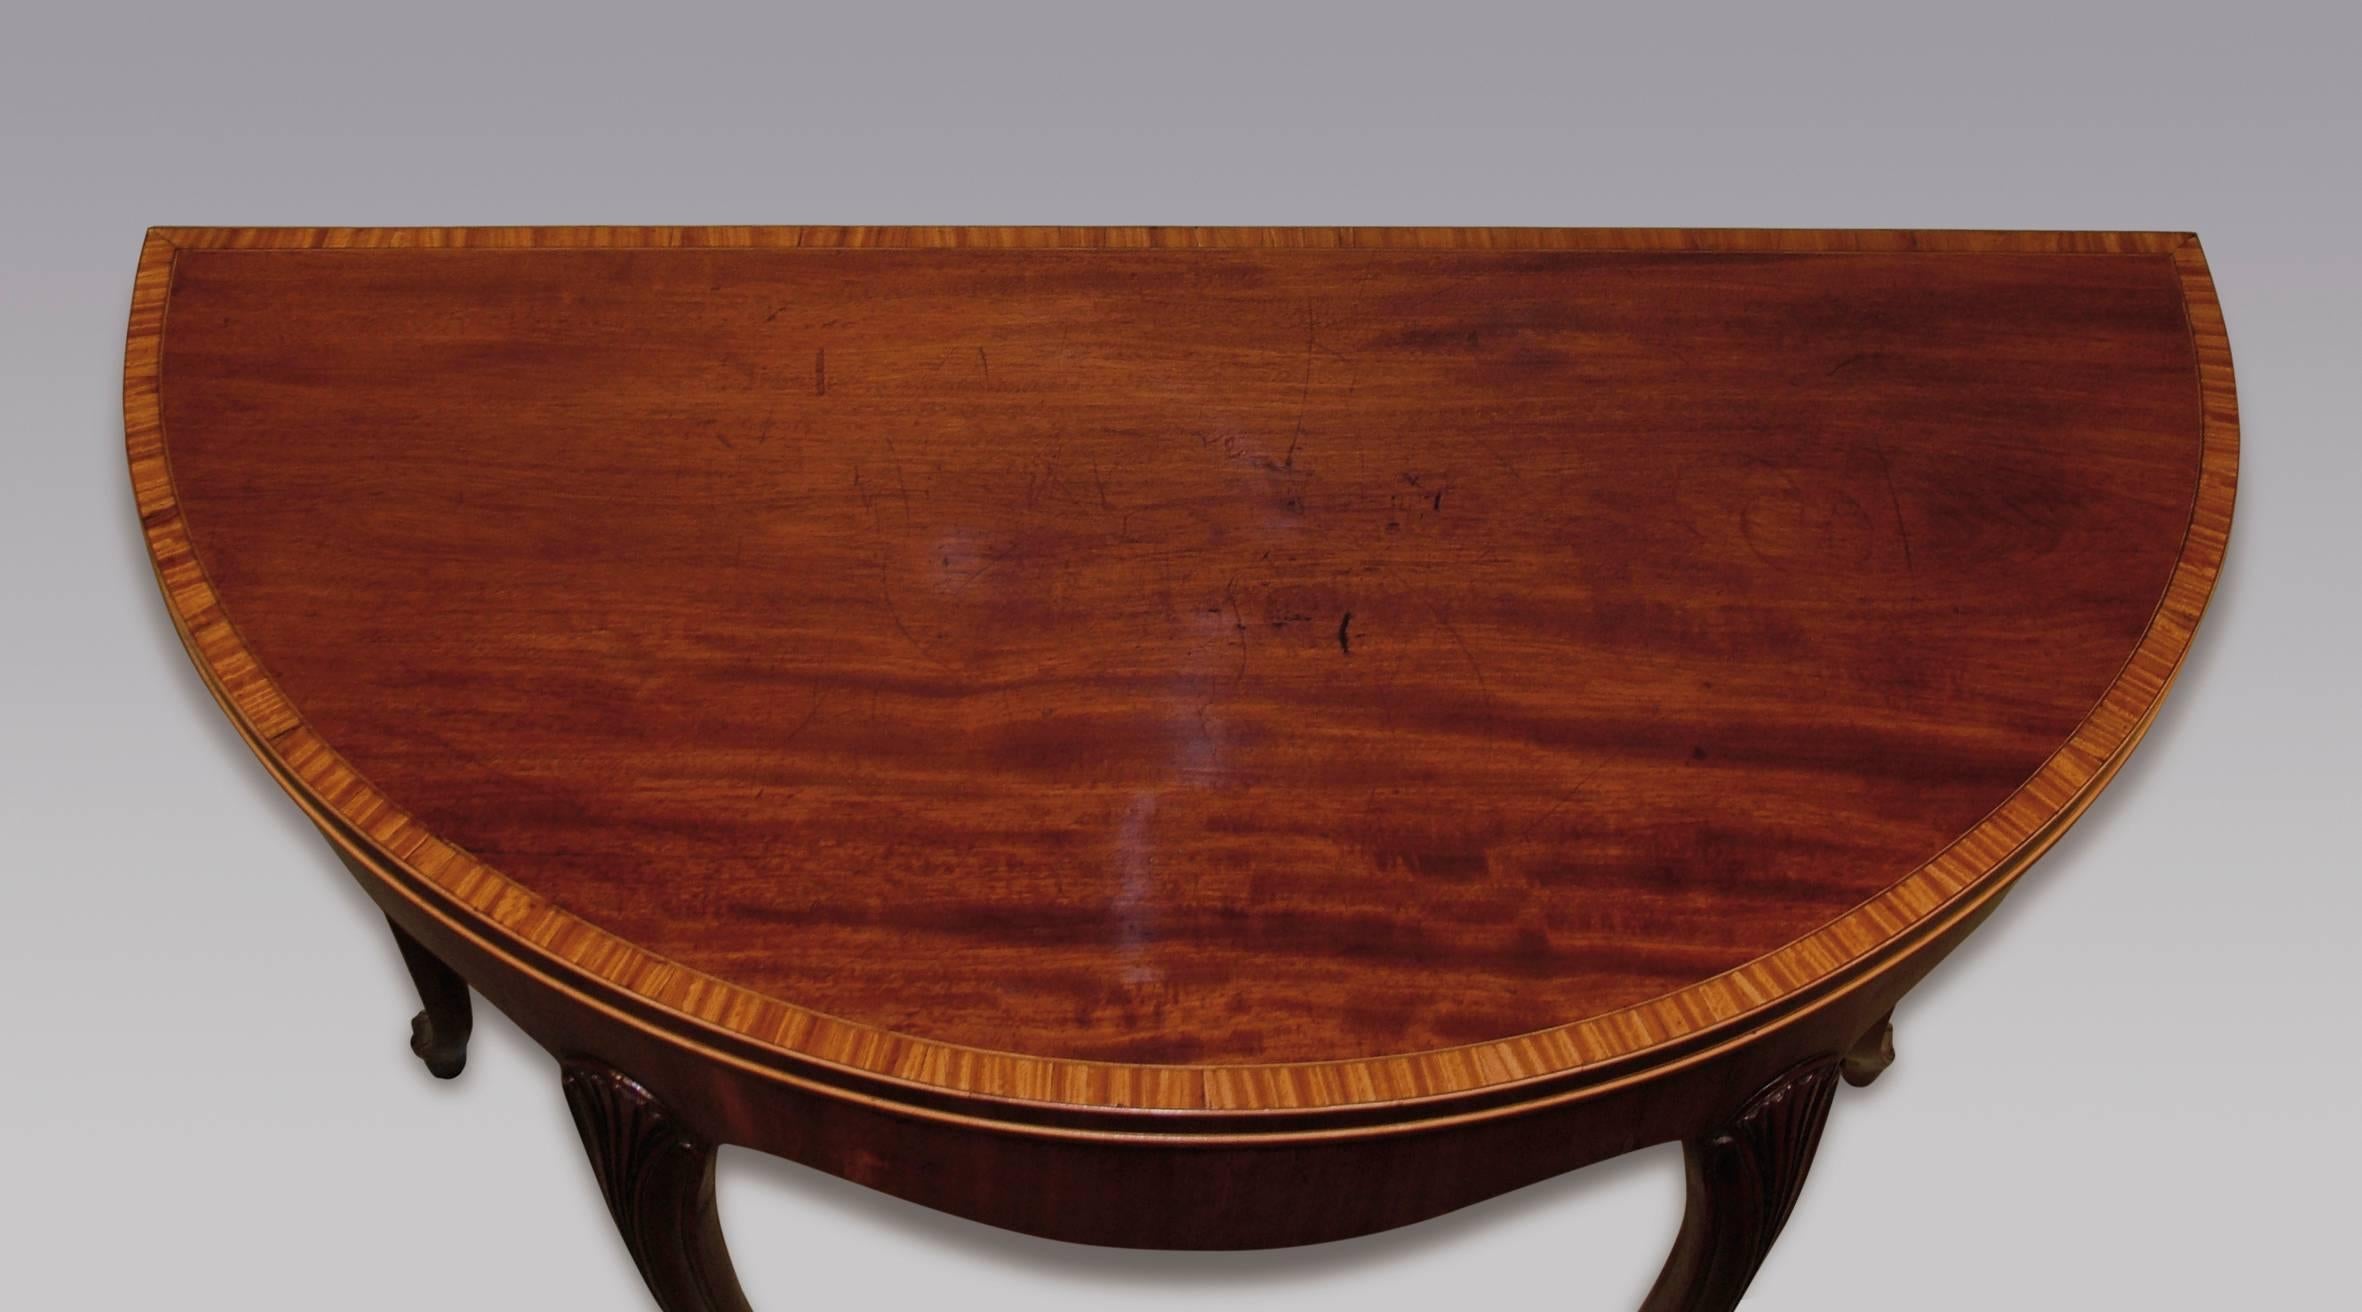 Chippendale 18th Century mahogany card tables with cabriole legs